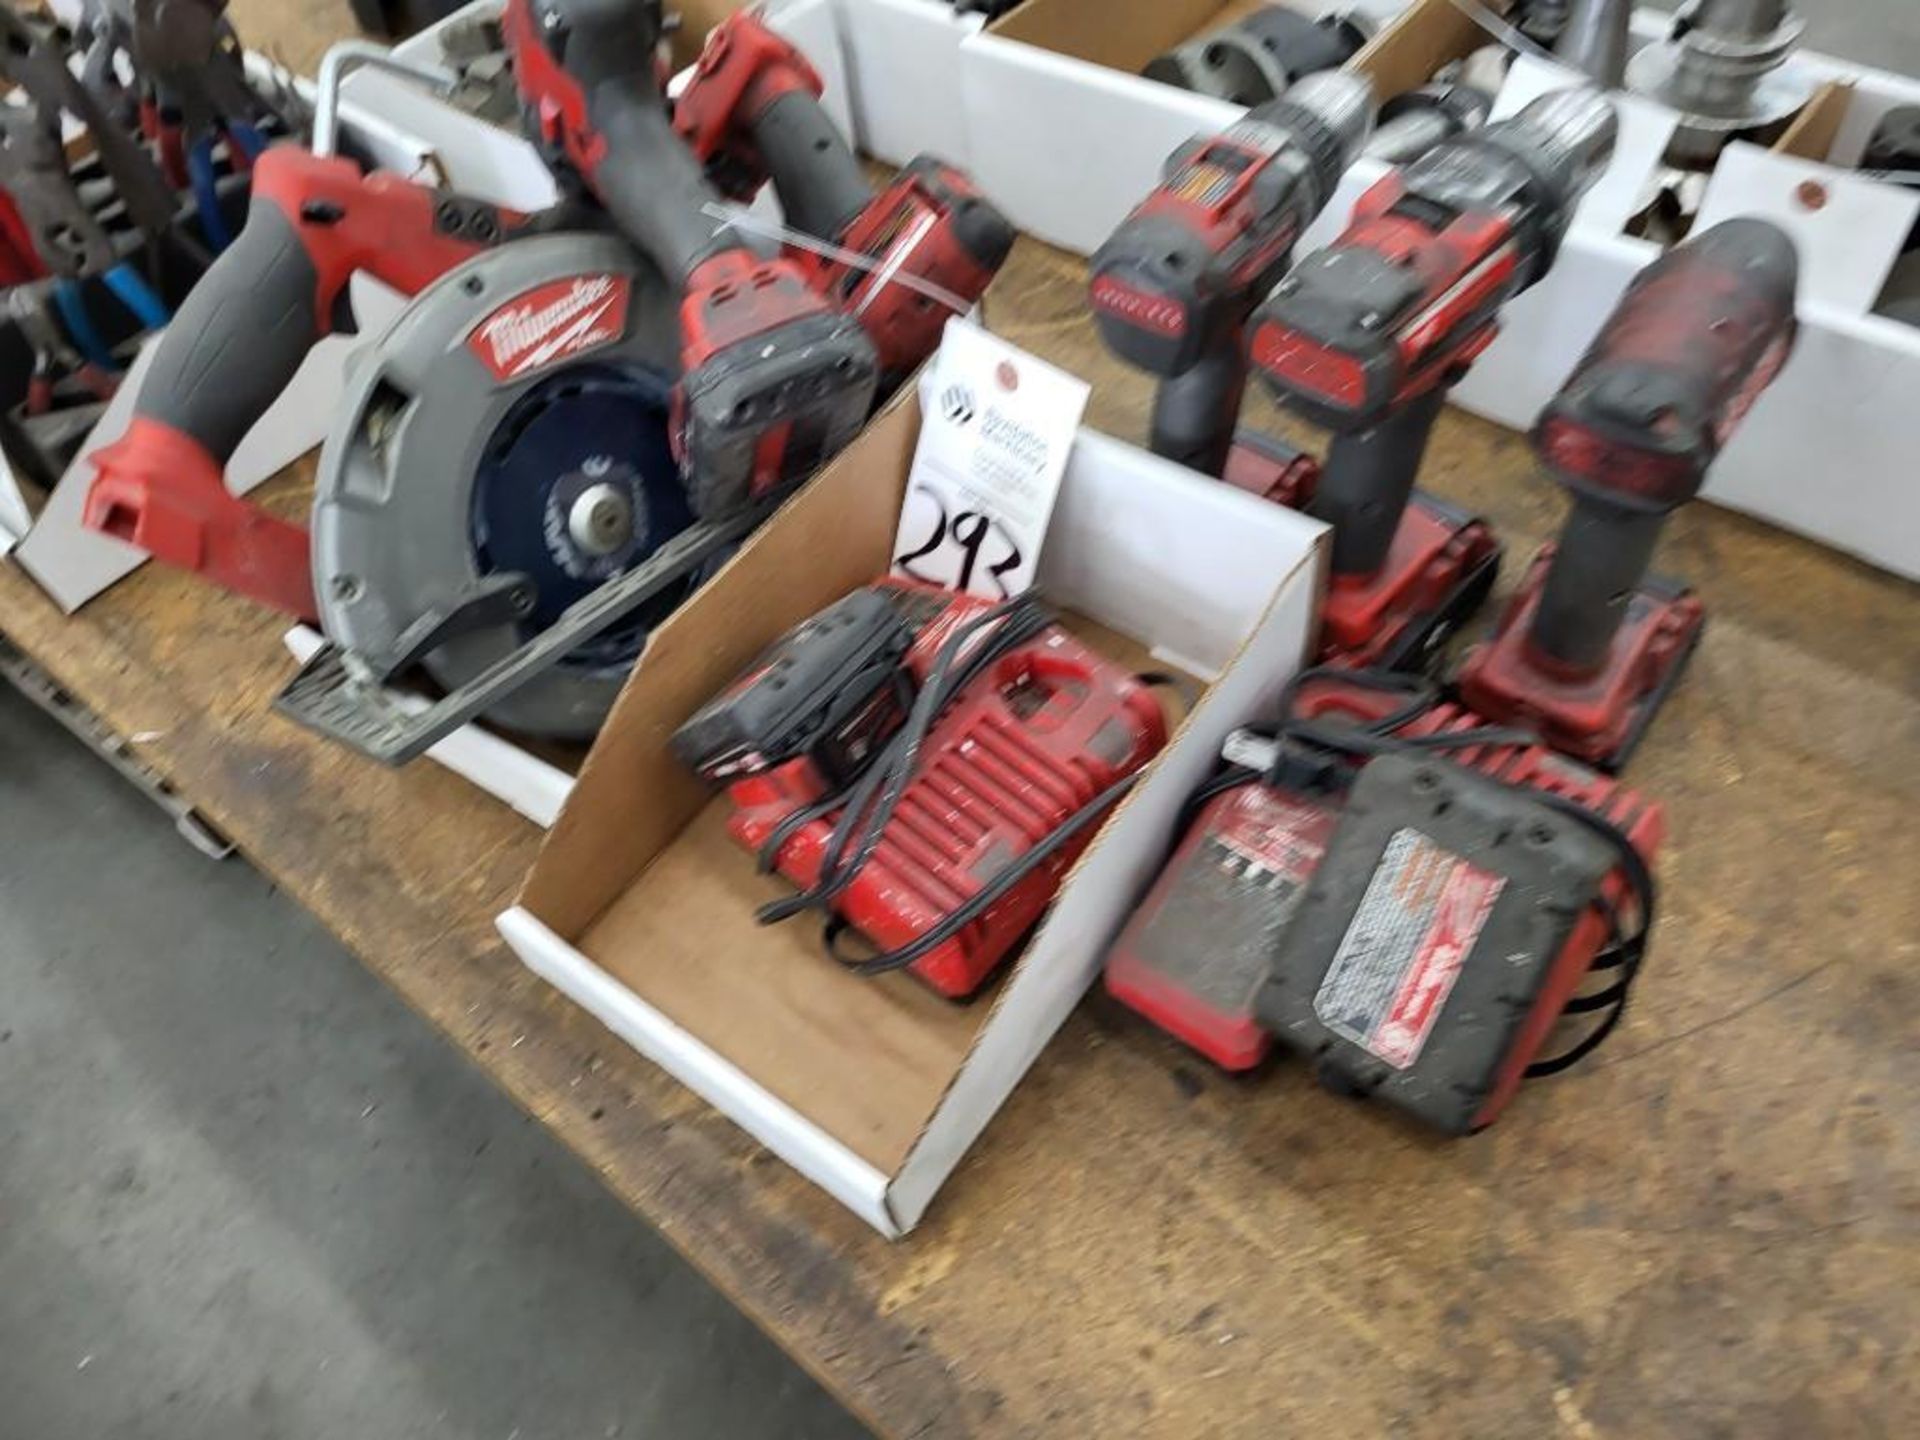 LOT OF MILWAUKEE CORDLIES DRILL DRIVERS, CIRCULAR SAW, CHARGERS, BATTERIES